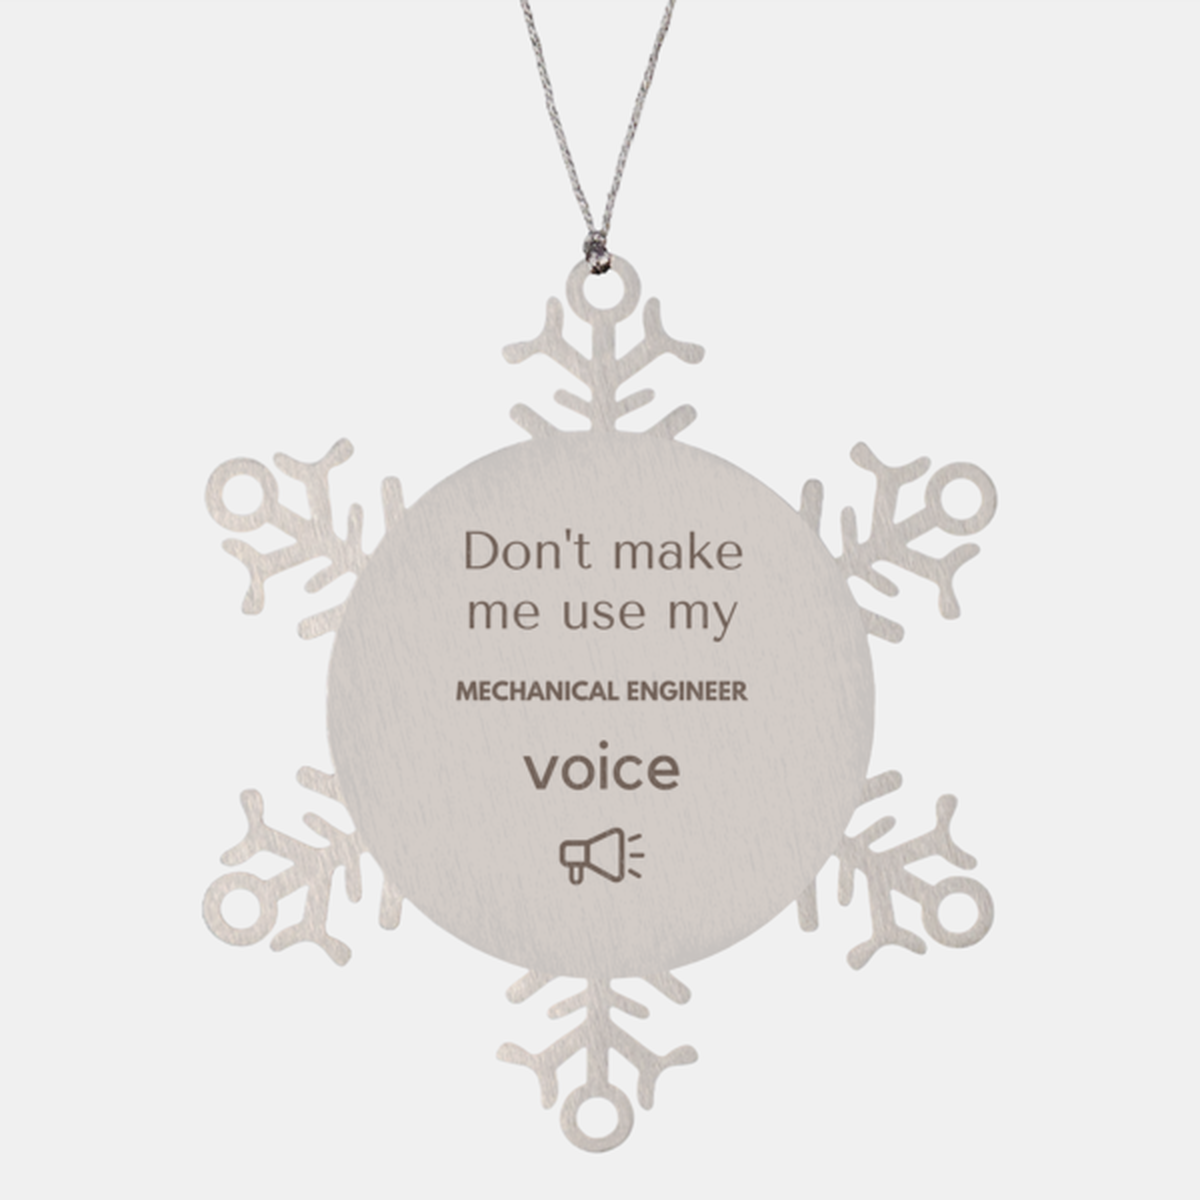 Don't make me use my Mechanical Engineer voice, Sarcasm Mechanical Engineer Ornament Gifts, Christmas Mechanical Engineer Snowflake Ornament Unique Gifts For Mechanical Engineer Coworkers, Men, Women, Colleague, Friends